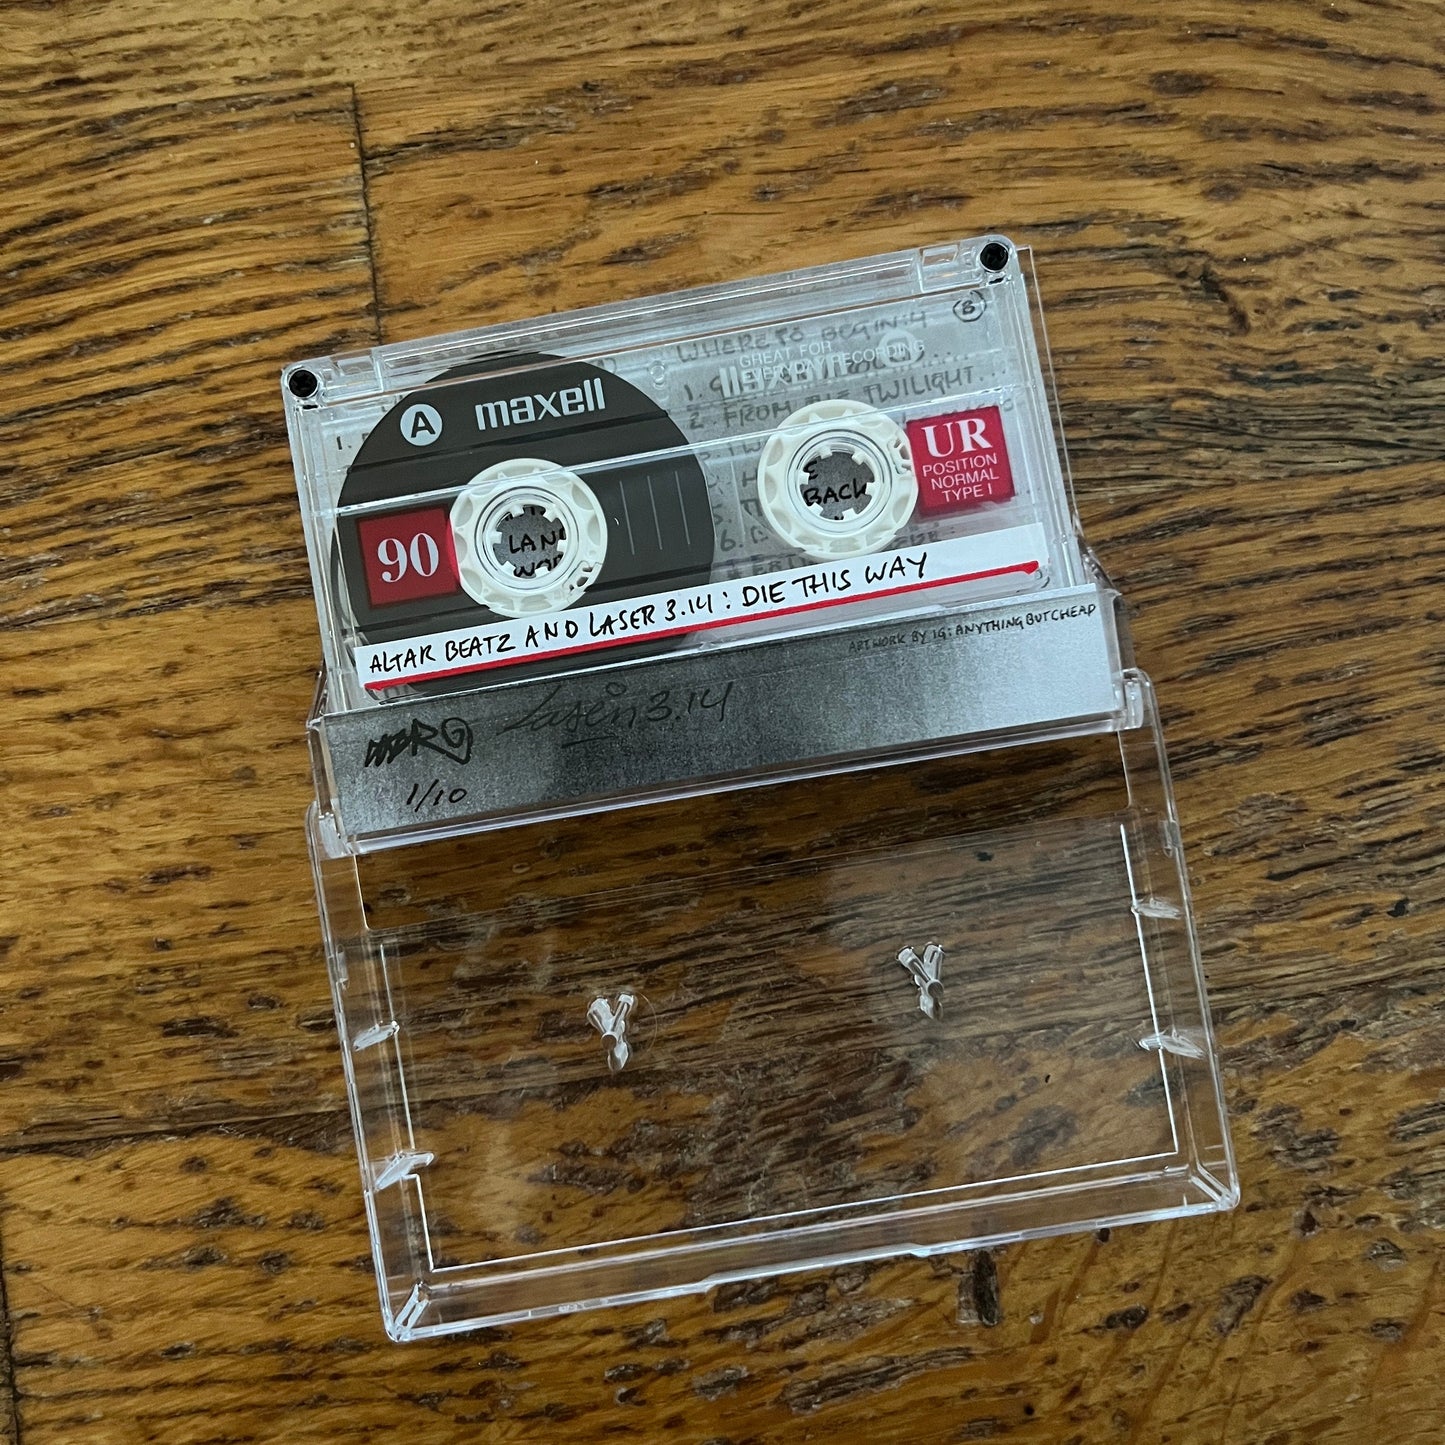 DIY Cassette Tape by Altar Beatz and Laser 3.14 - DIE THIS WAY 10/10